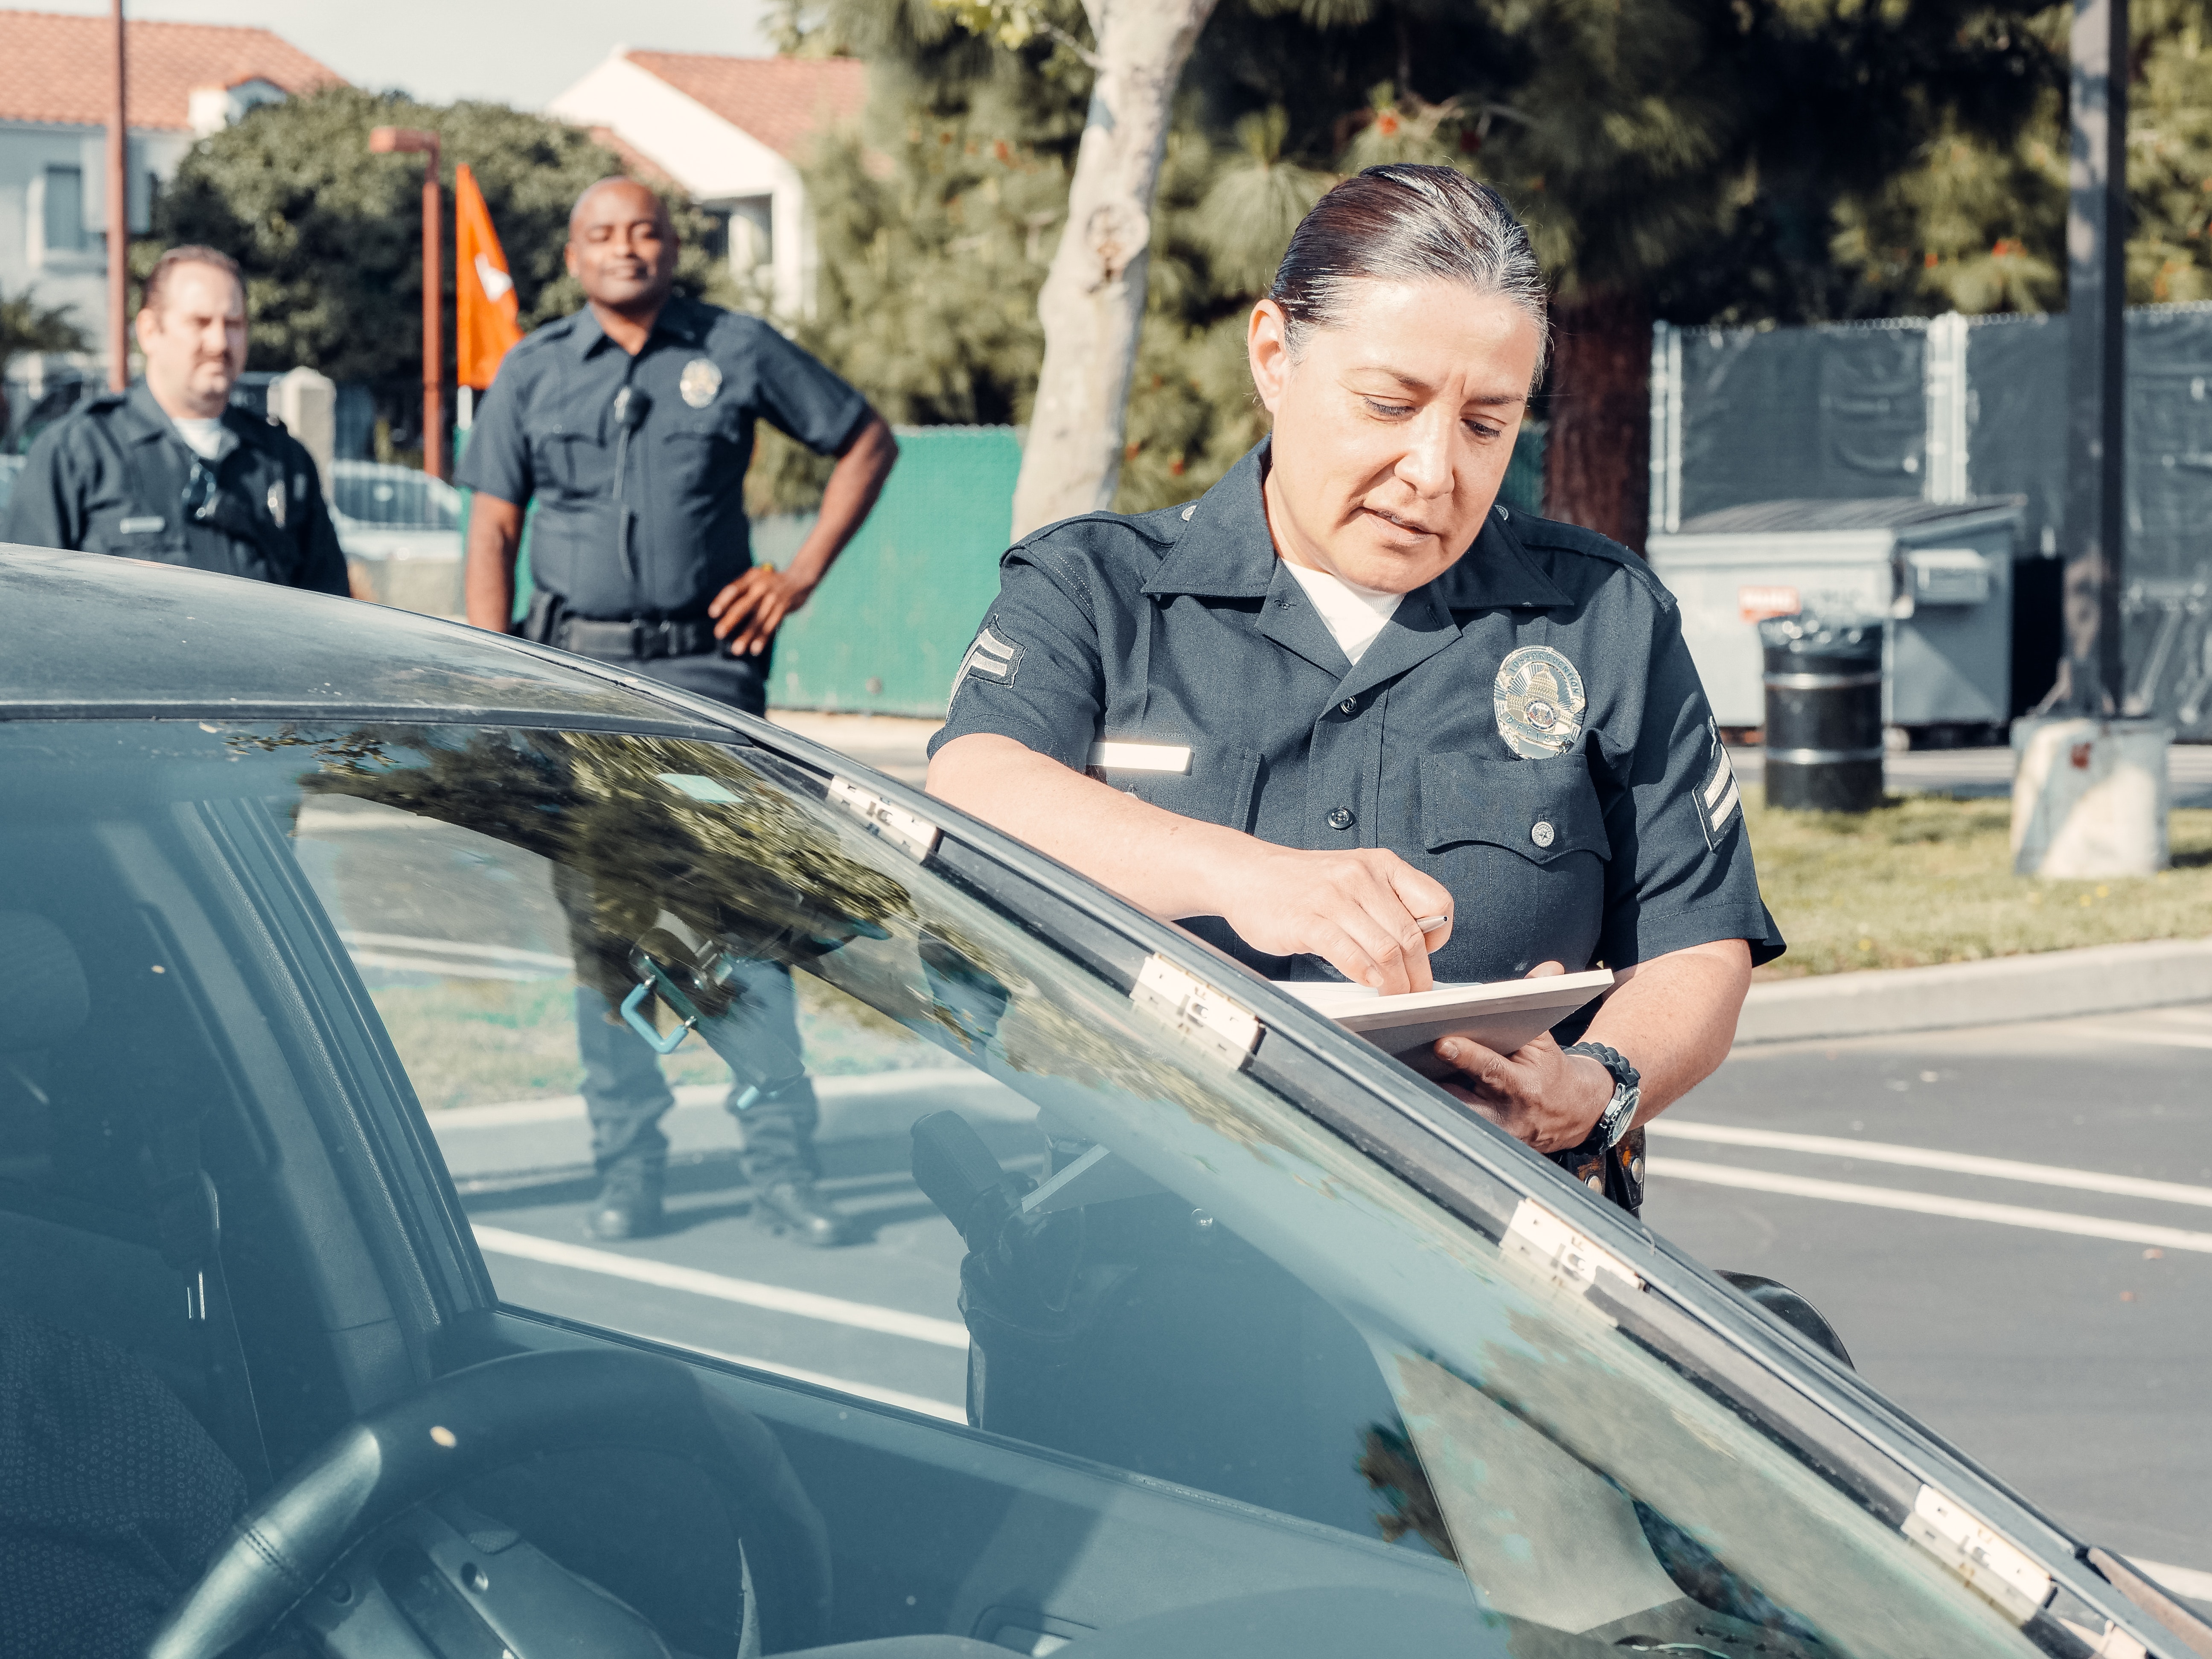 A female police officer, with a badge visible on her uniform, is writing on a notepad beside a car, with two other officers standing in the background. This scene typically represents a traffic stop by law enforcement, where documentation and vehicle registration details are being checked.